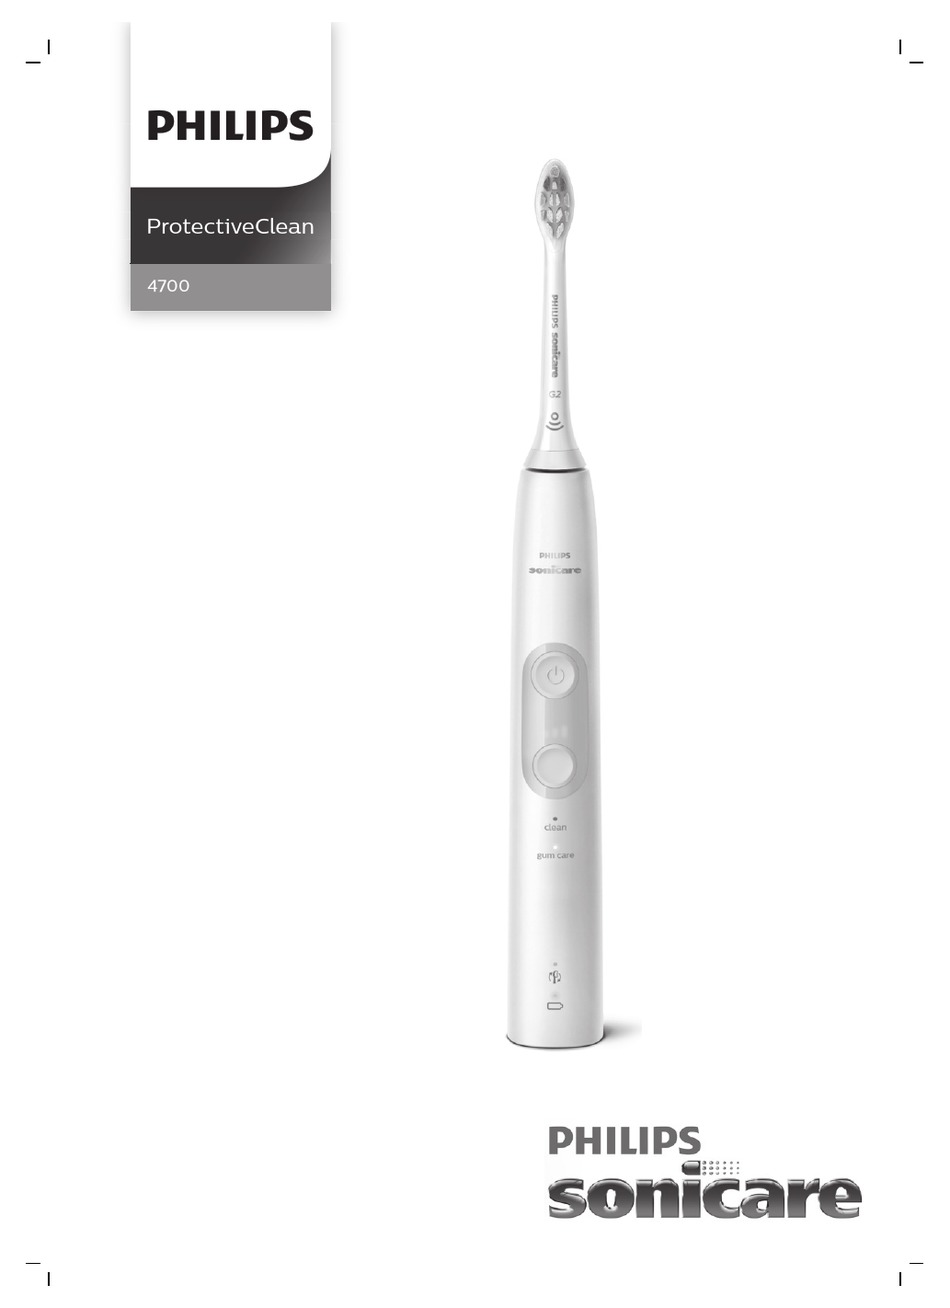 philips-sonicare-protectiveclean-4700-manual-pdf-download-manualslib